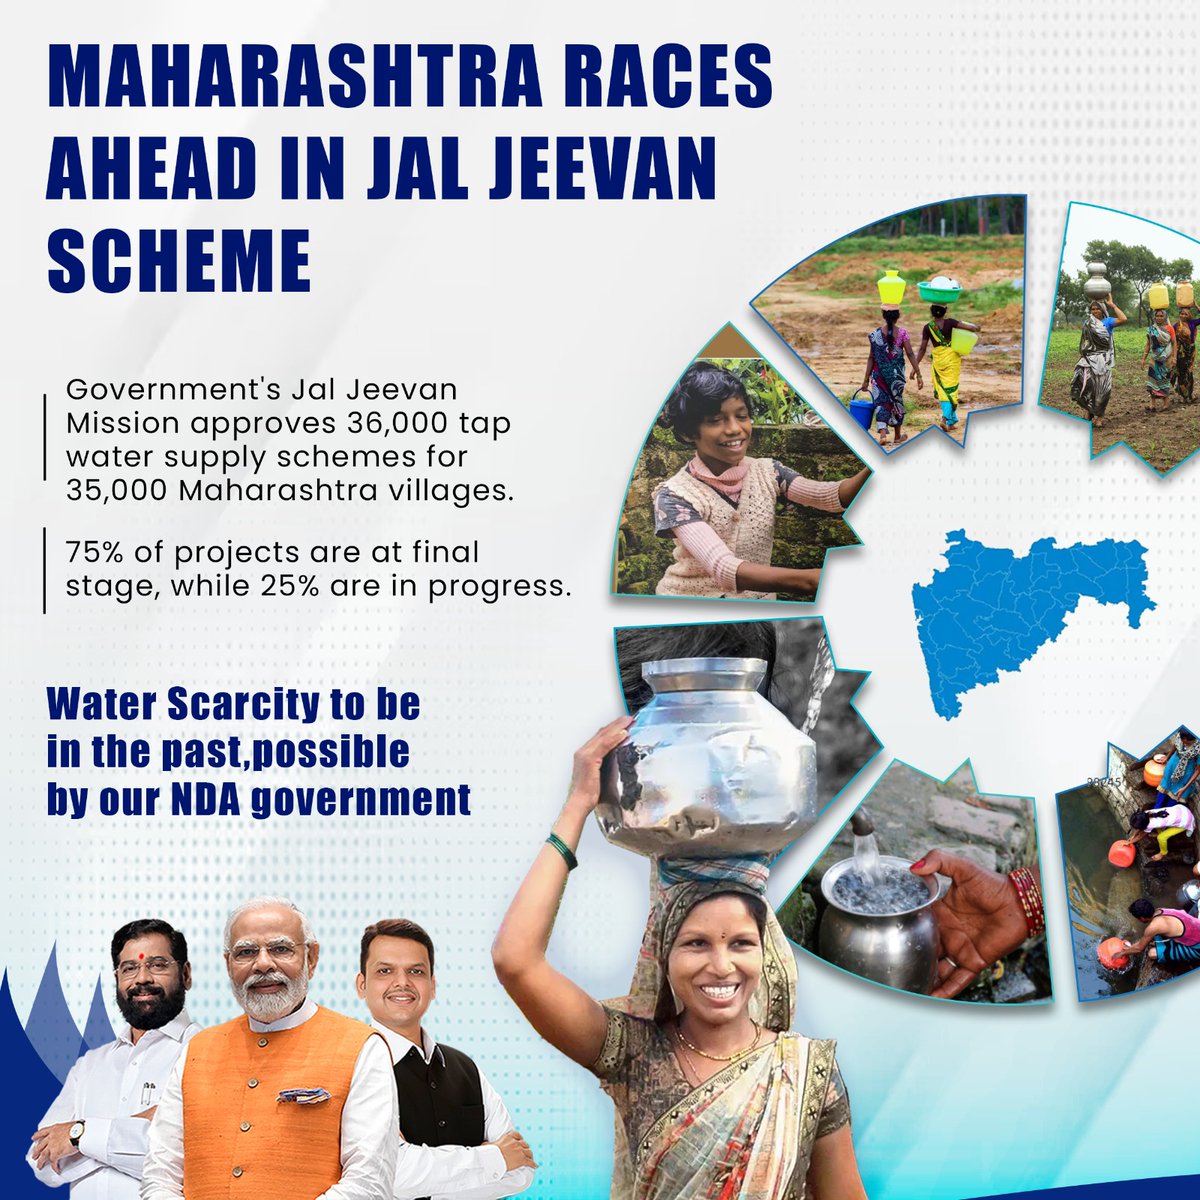 Big strides for Maharashtra as Jal Jeevan Mission gives the green light to 36,000 tap water supply schemes, benefitting 35,000 villages. Kudos to CM Eknath Shinde and team for their relentless efforts!